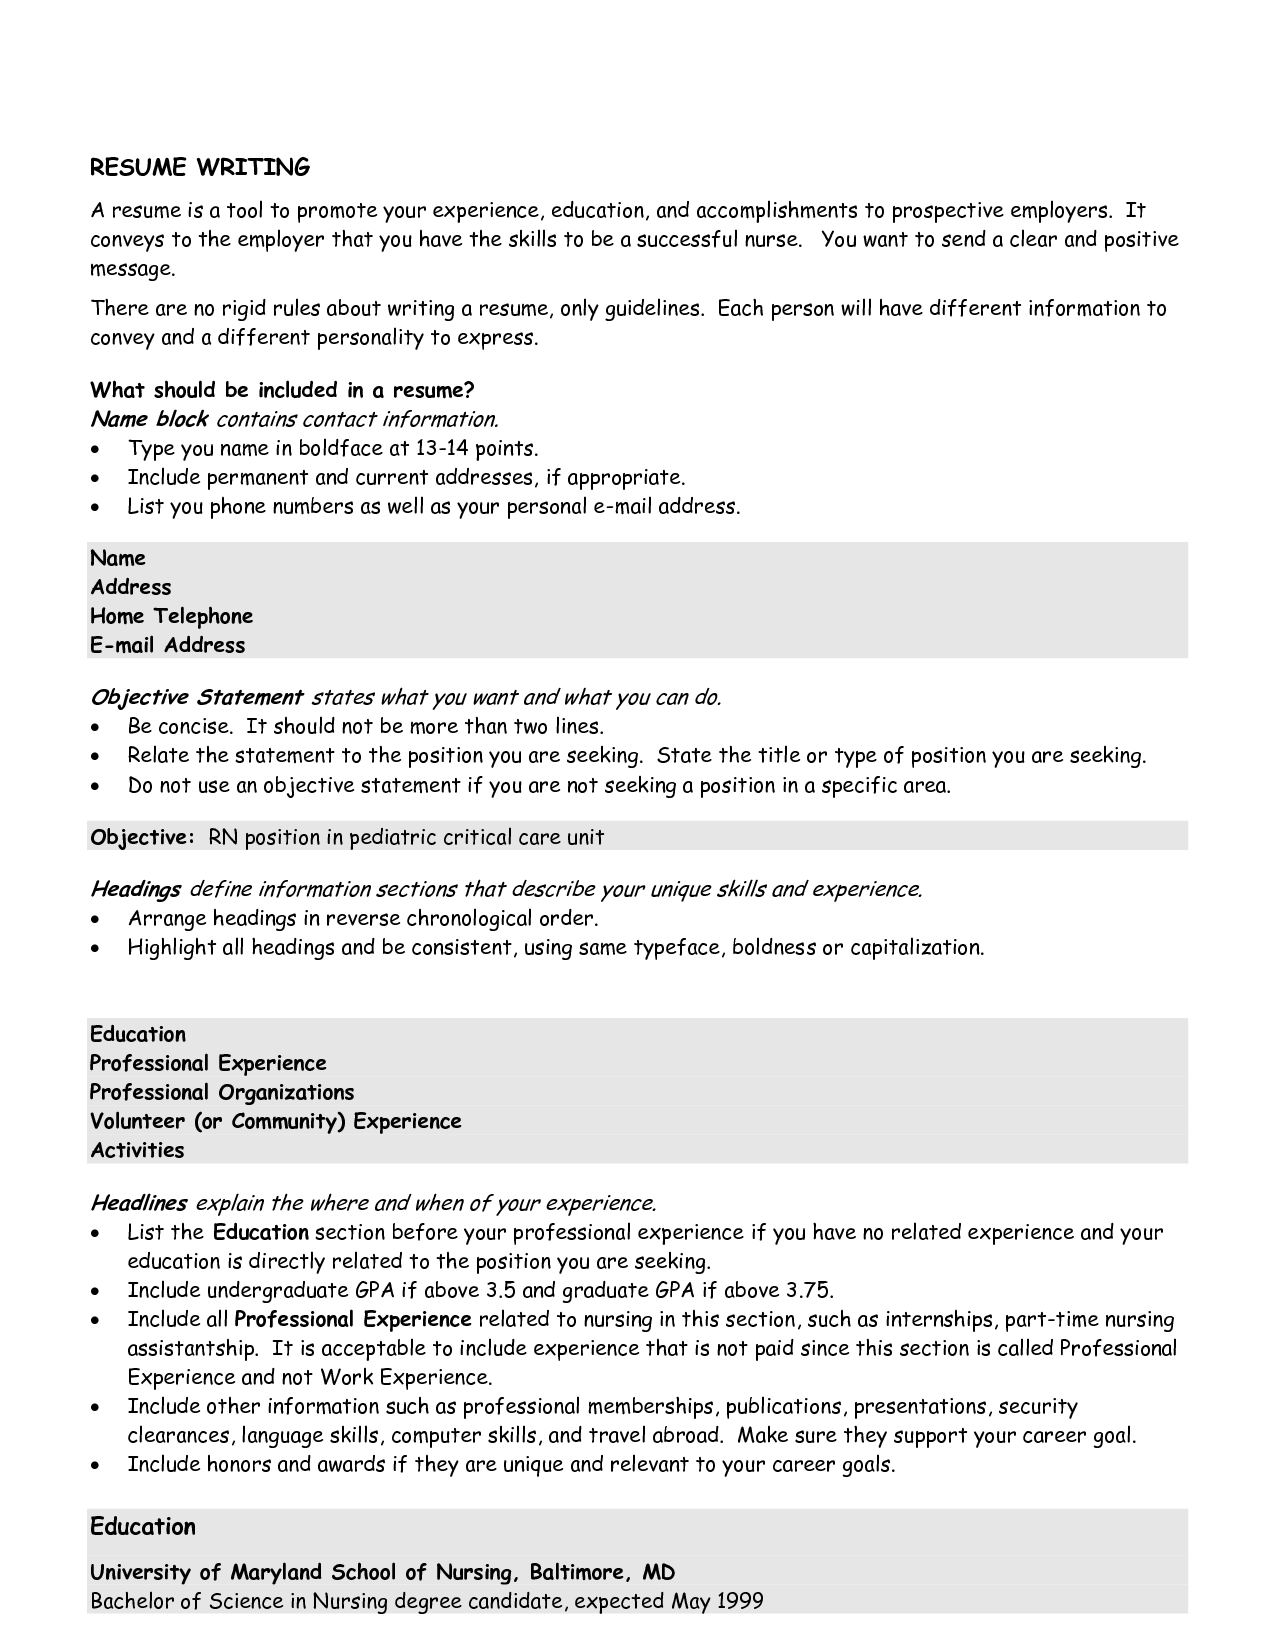 General Resume Objectives essayscope.Com